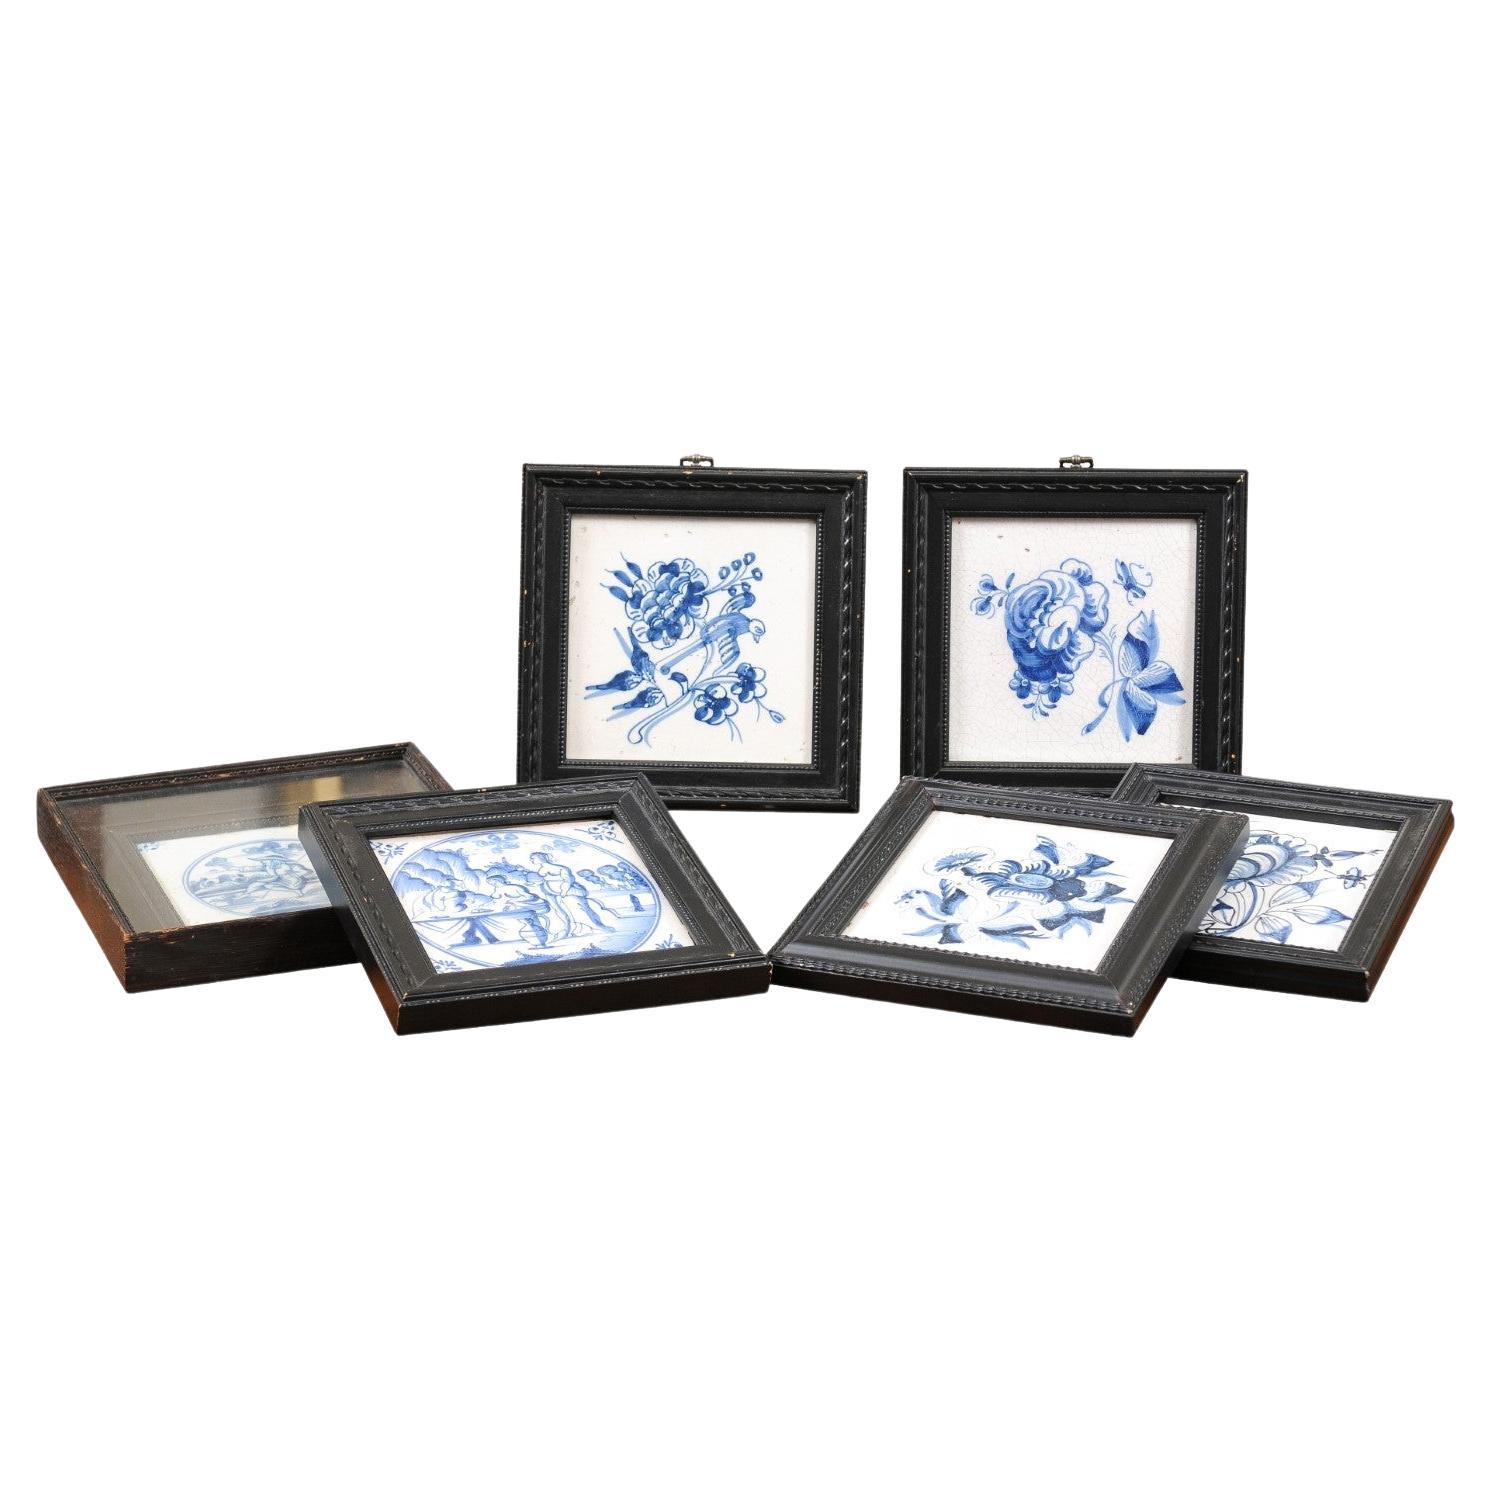  Set of 6 Assorted 18th Century Blue & White Delft Tiles in Black Frames For Sale